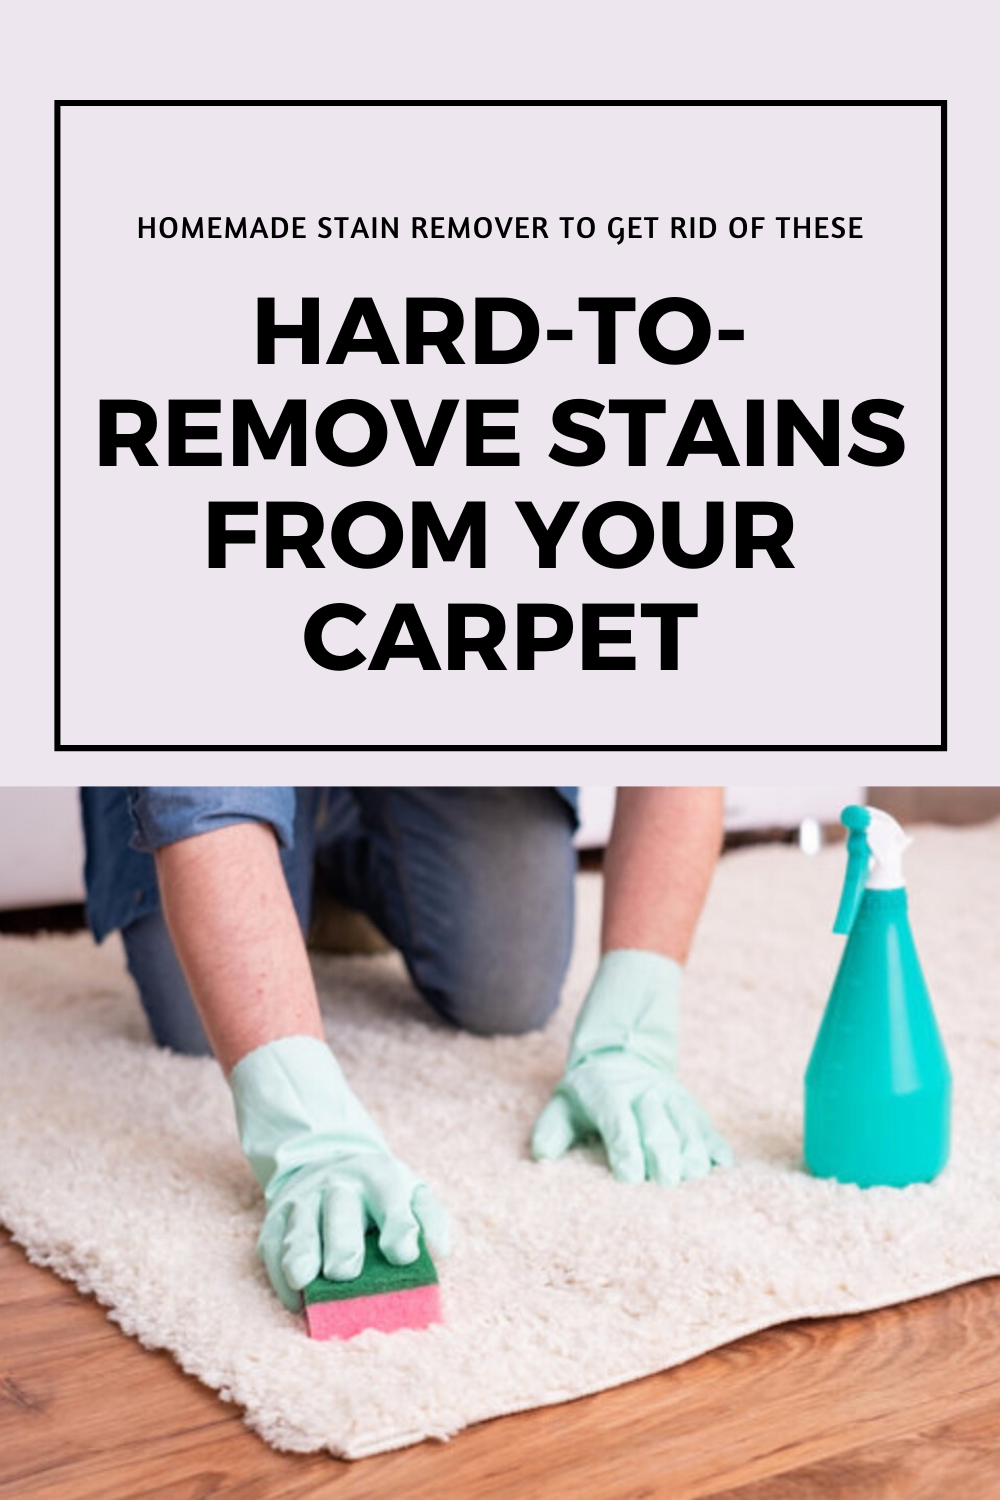 Homemade Stain Remover To Get Rid Of These Hard-To-Remove Stains From